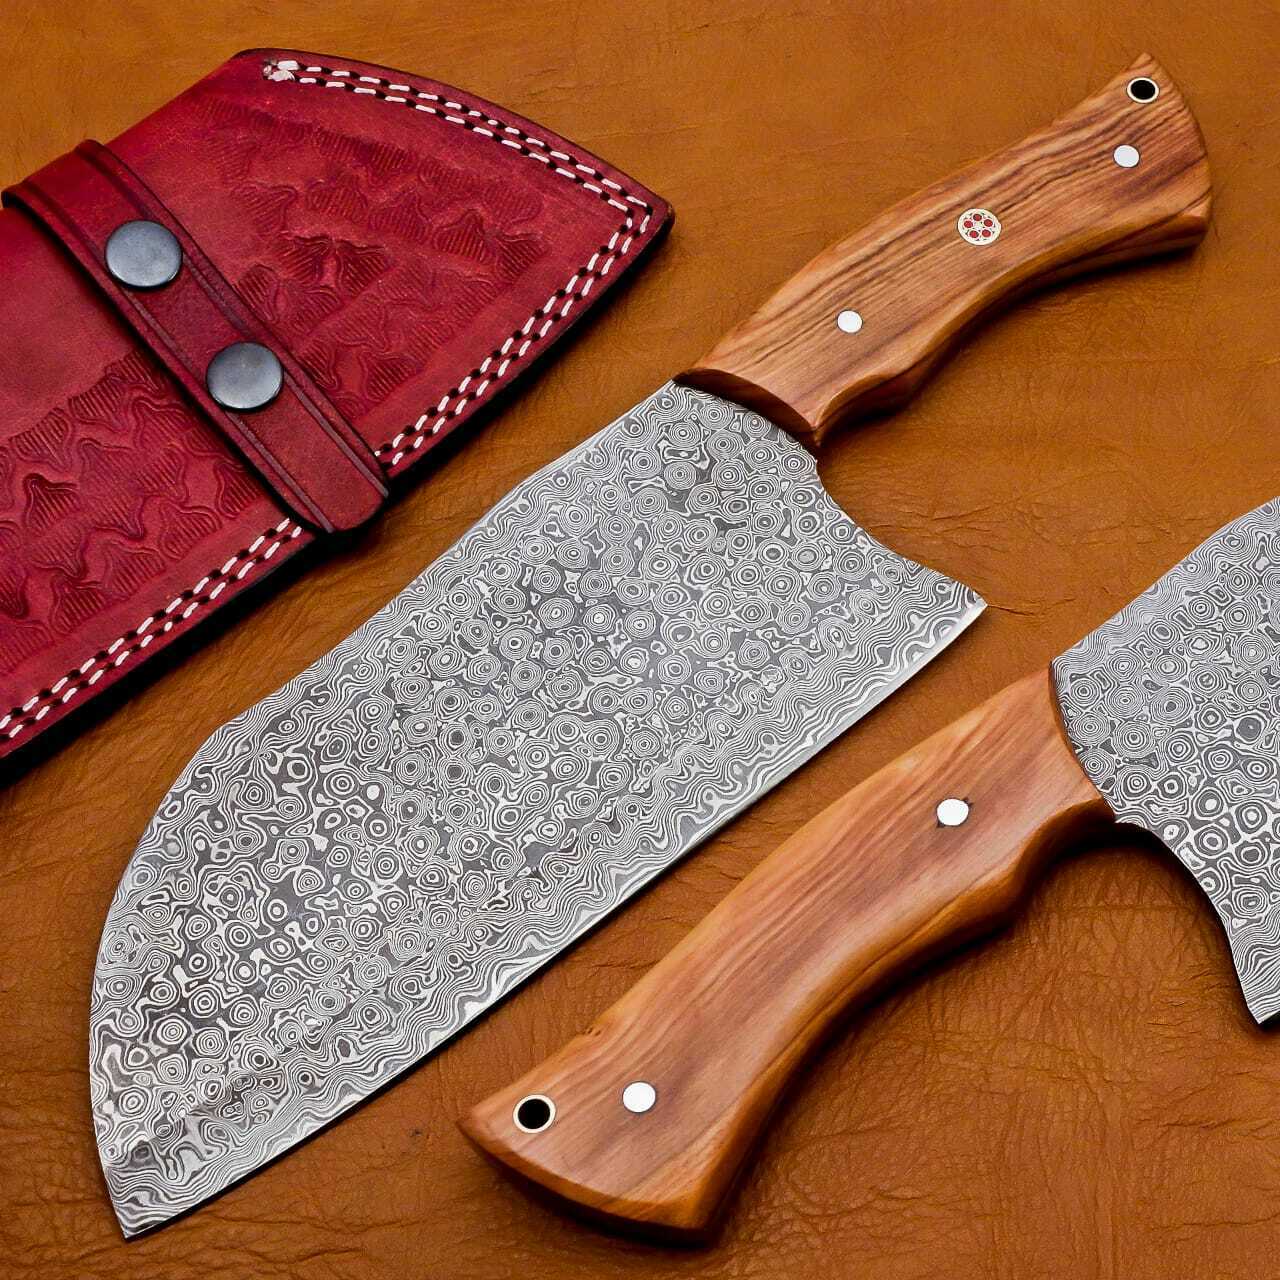 Professional Damascus chef's cleaver 256 layers With Leather Sheath Full Tang